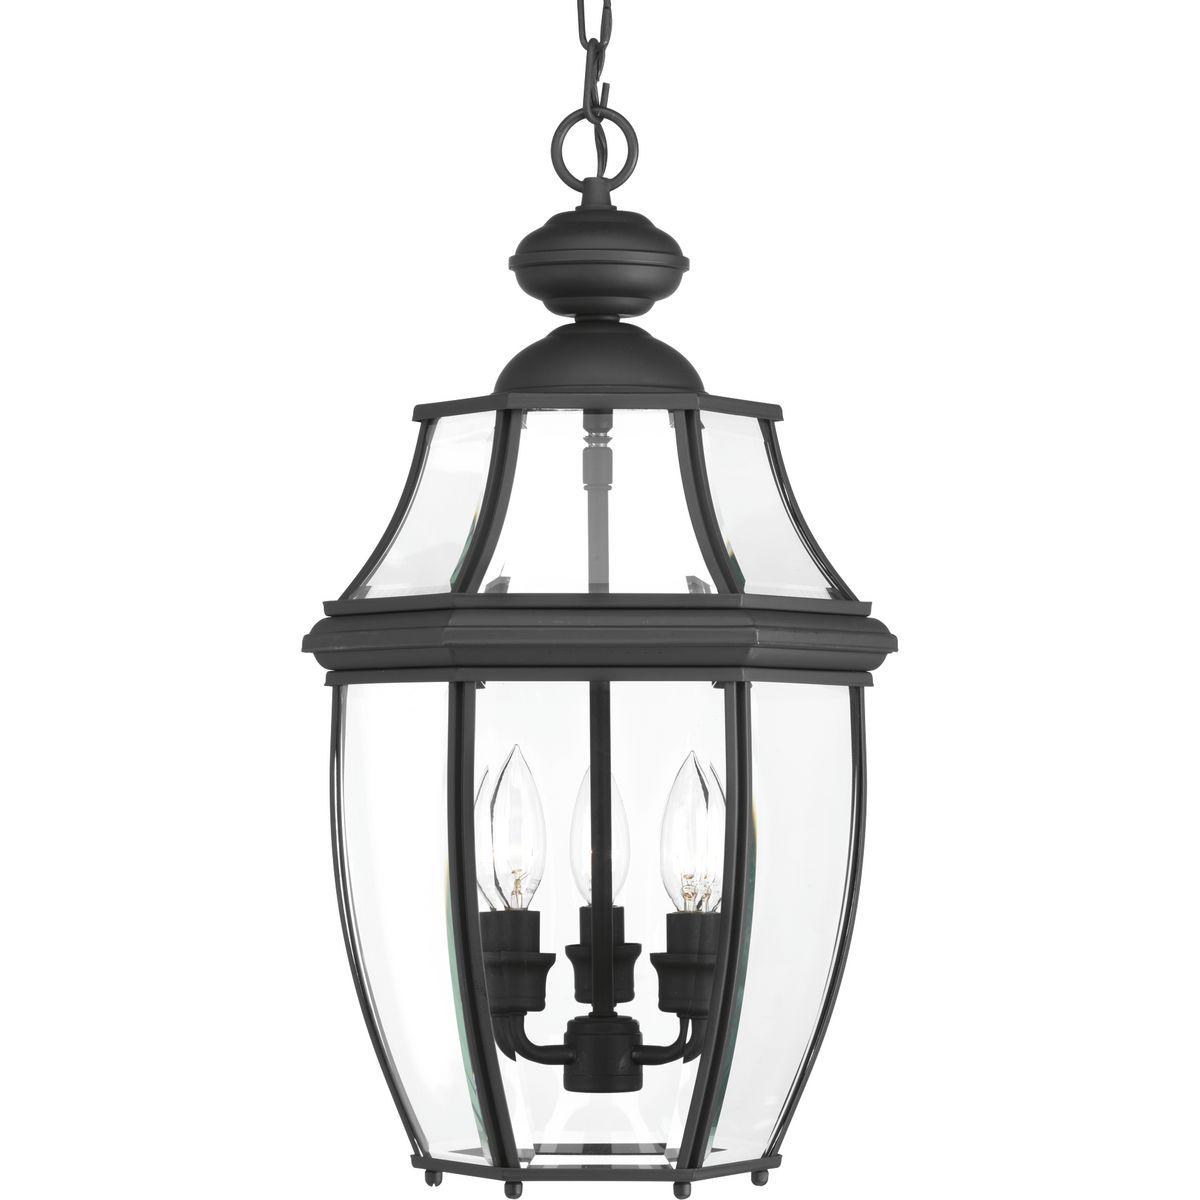 Hubbell P6533-31 A Black finish complements clear beveled glass in the New Haven outdoor hanging lantern. Durable aluminum construction. Open bottom design allows easy access to replace lamps without removing any pieces. Post, hanging and wall options are available.  ; Bl